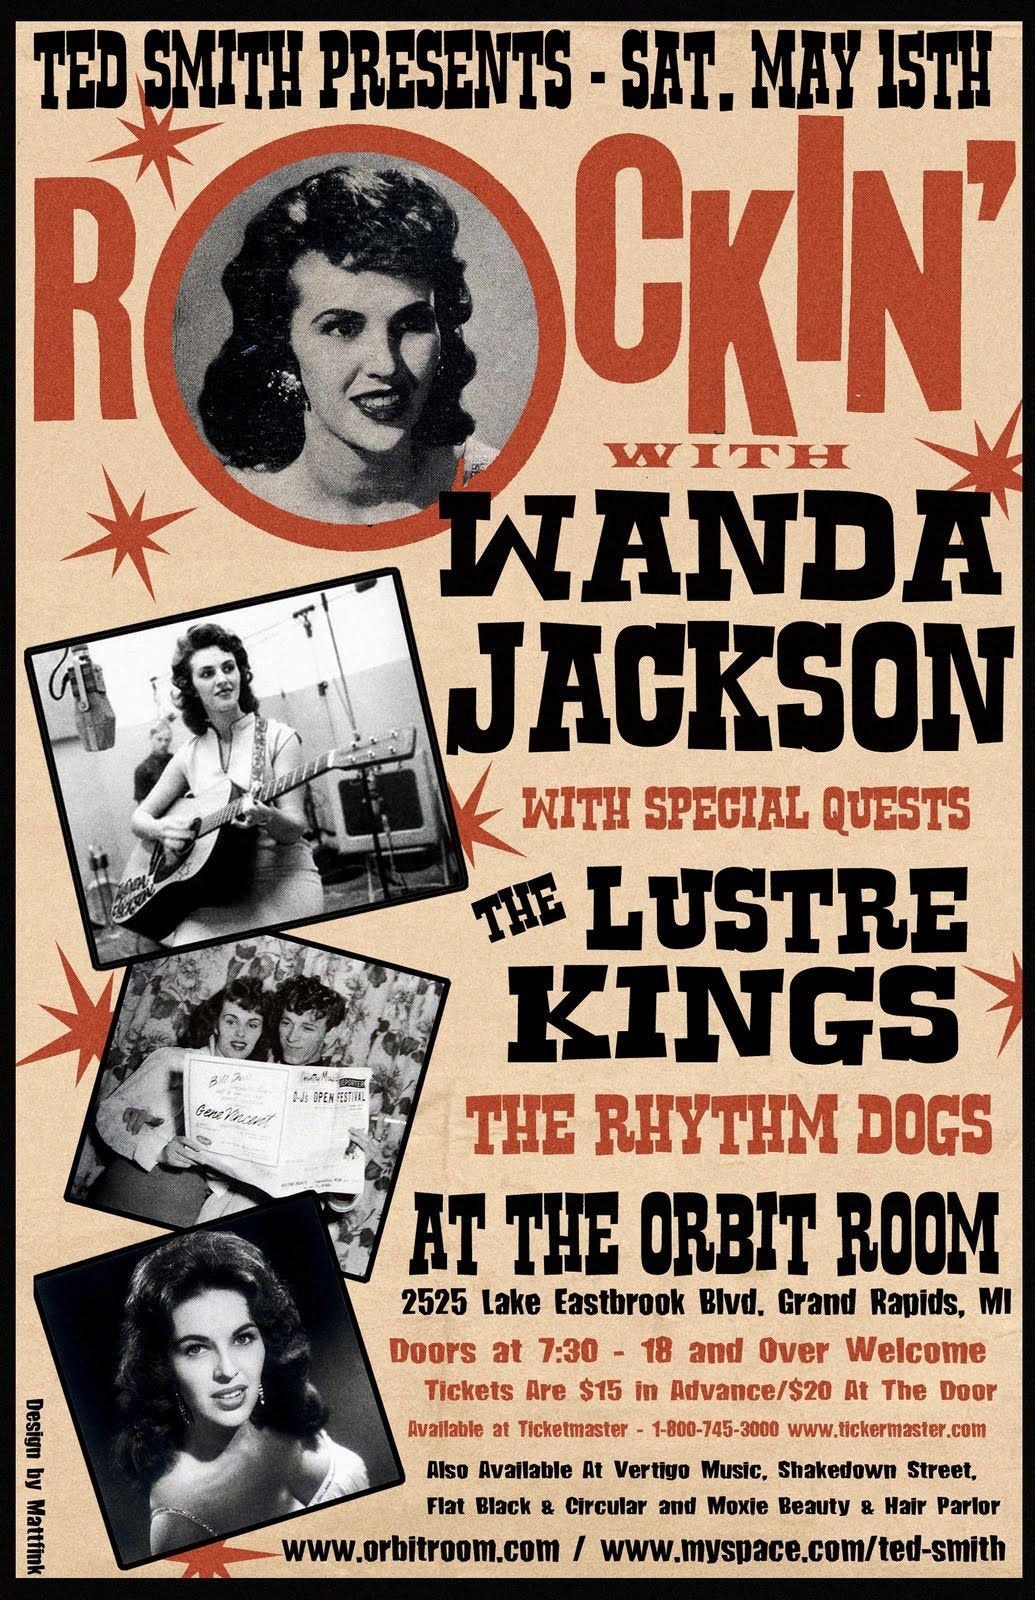 Vintage Music Art  -  Wanda Jackson With Special Guests 0805